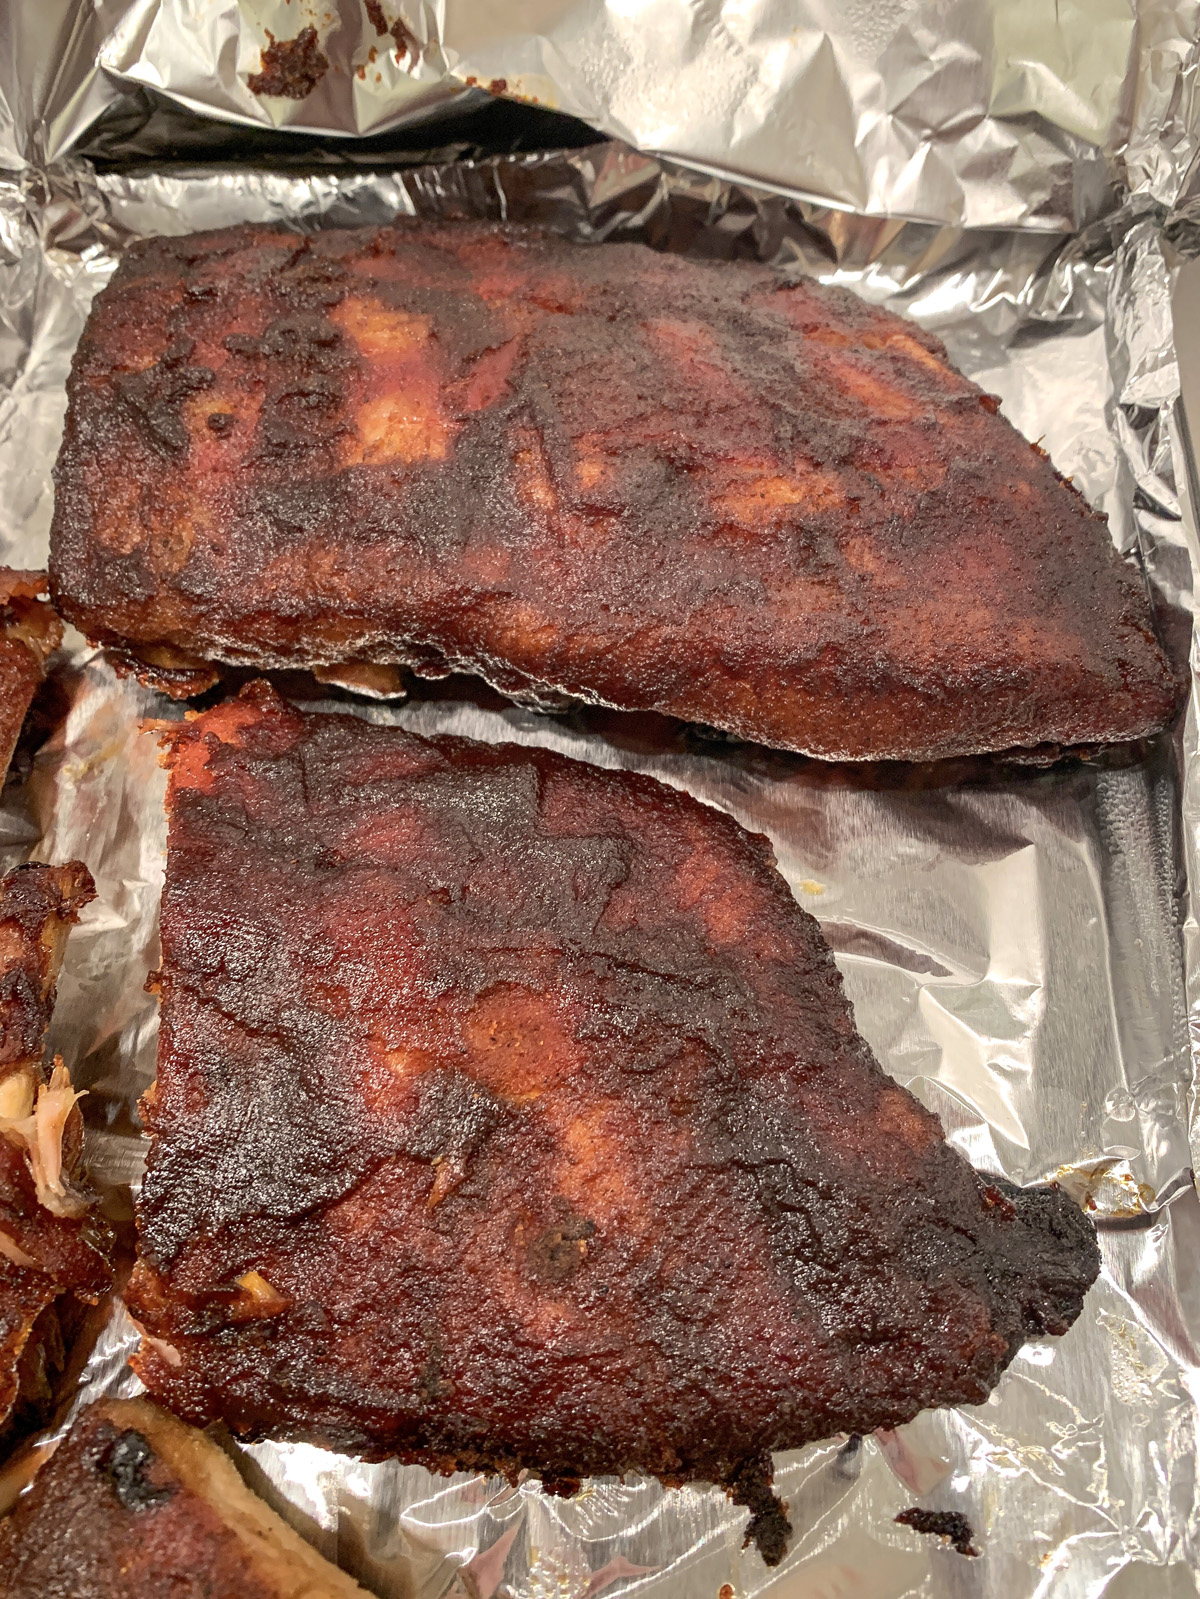 The Best Smoked Ribs & Rib Rub Recipe - Be the most popular person at the summer BBQ and make these delicious ribs! | Kristy Wicks